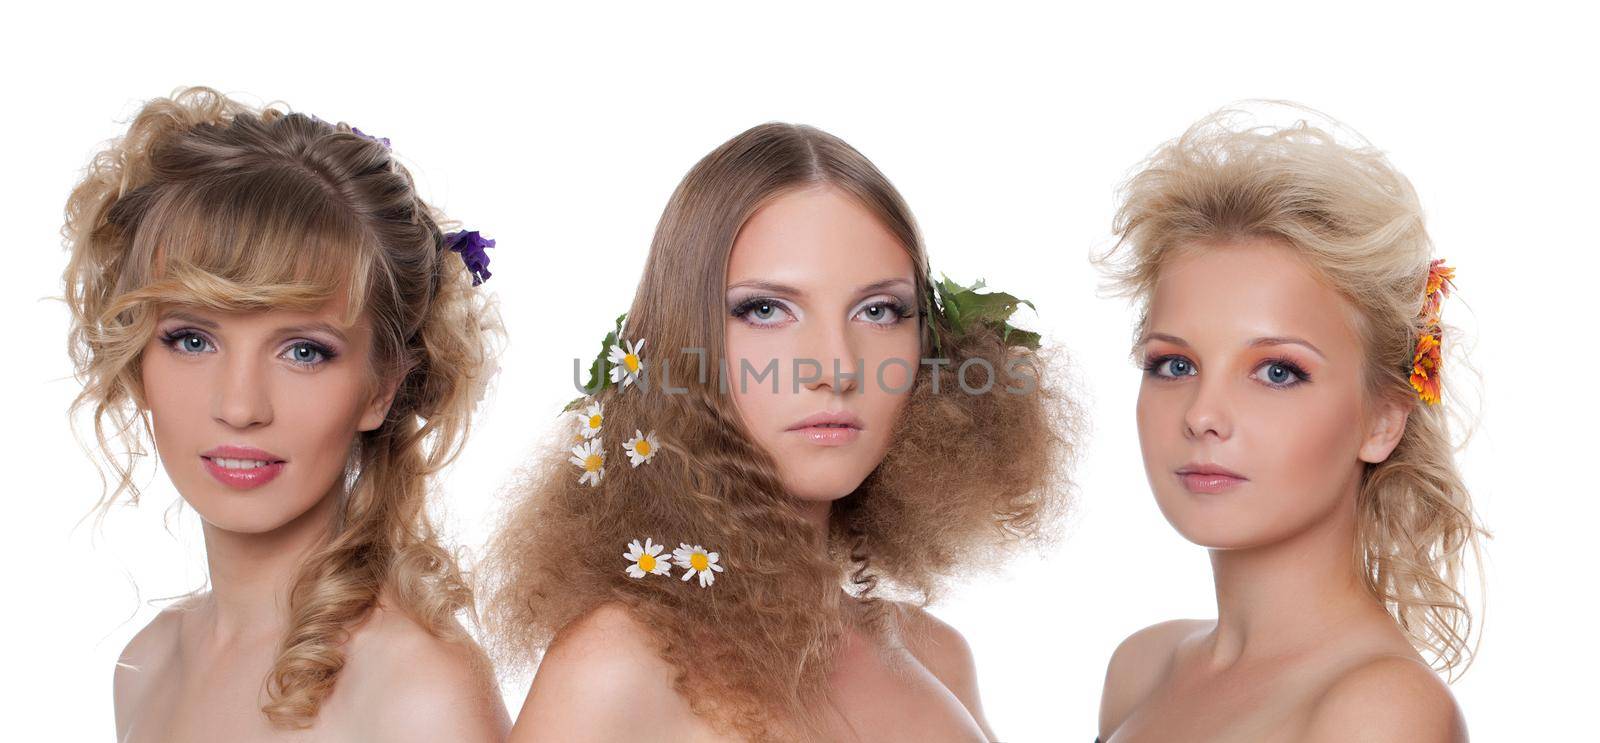 Three young naked women with flower hair style by rivertime